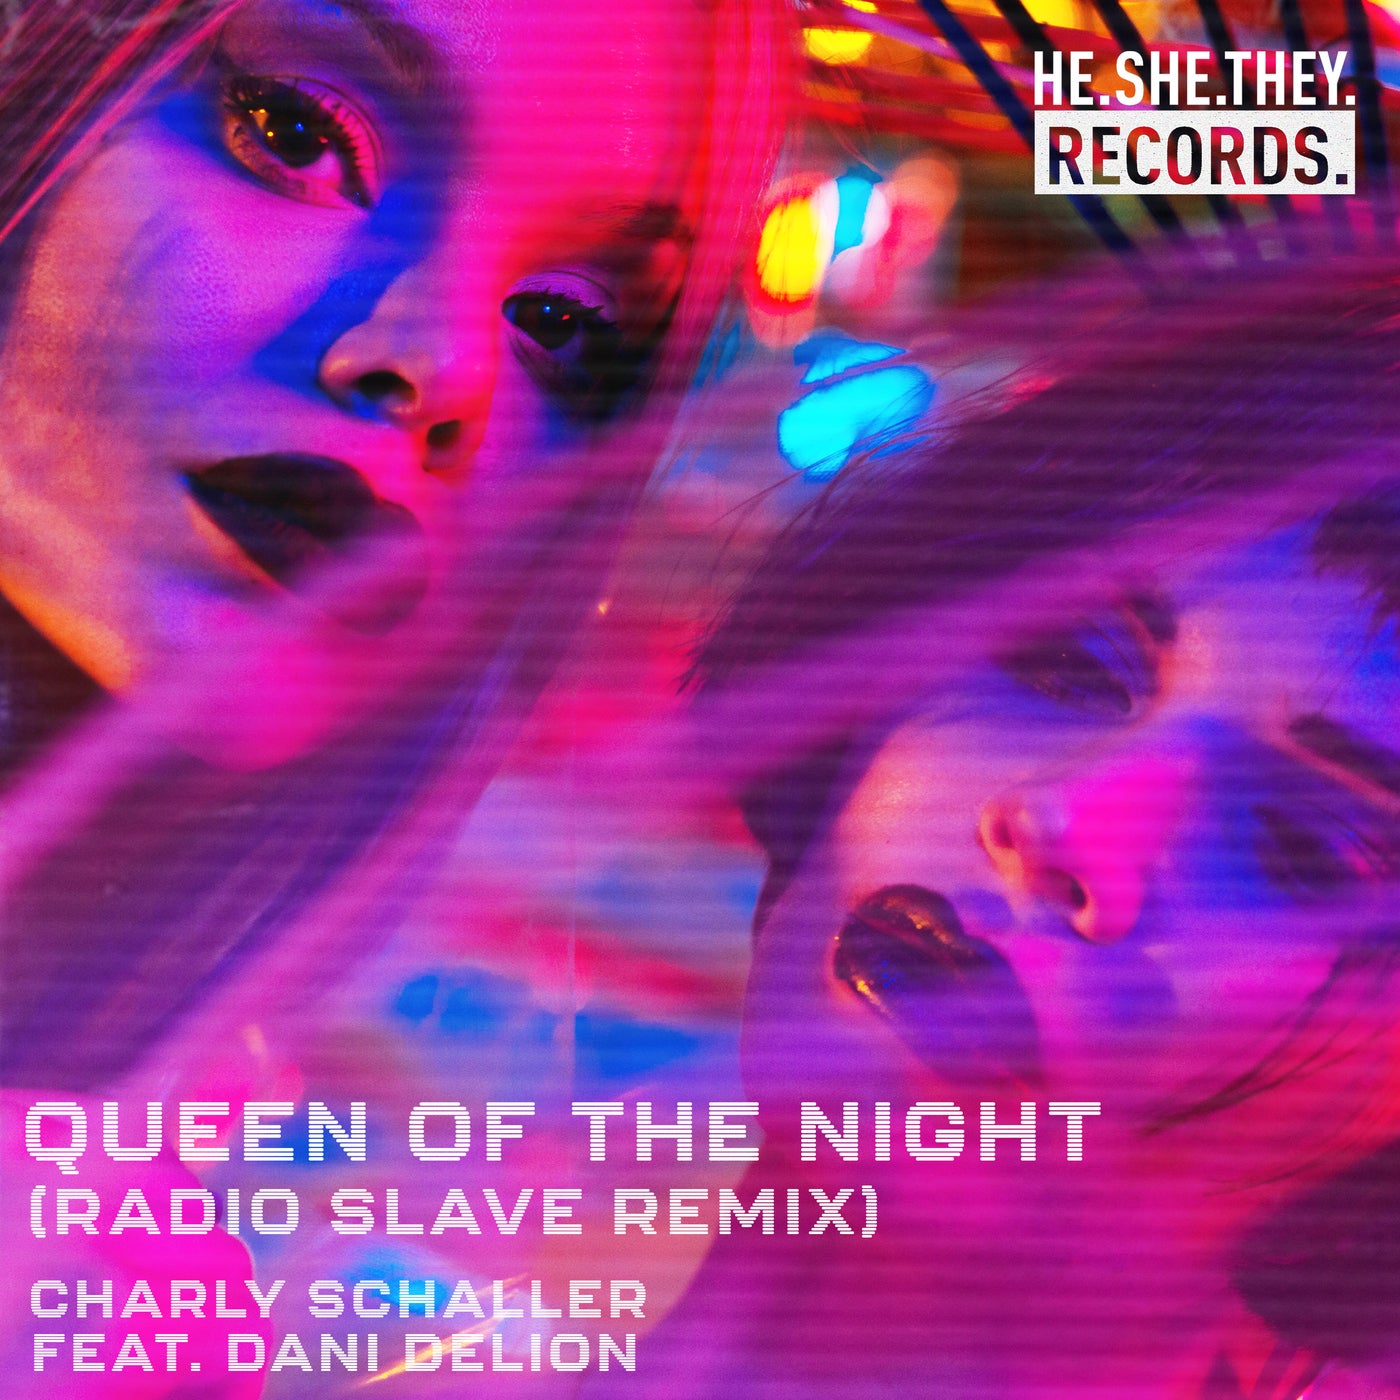 Download Queen Of The Night feat. Dani DeLion [Radio Slave Remix] on Electrobuzz